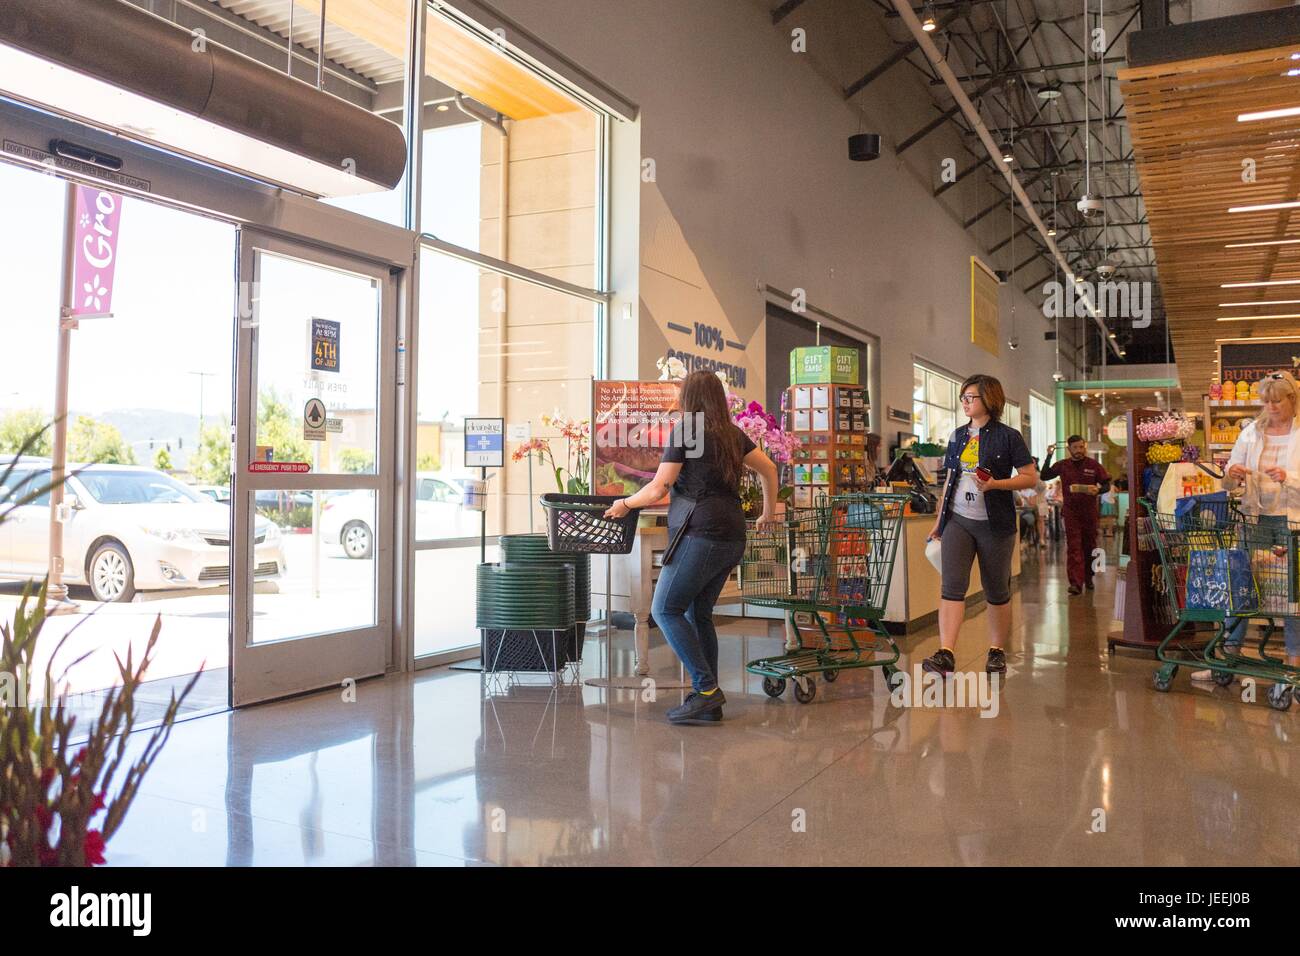 Several shoppers push carts towards the exit at the Whole Foods Market grocery store in Dublin, California, June 16, 2017. Stock Photo